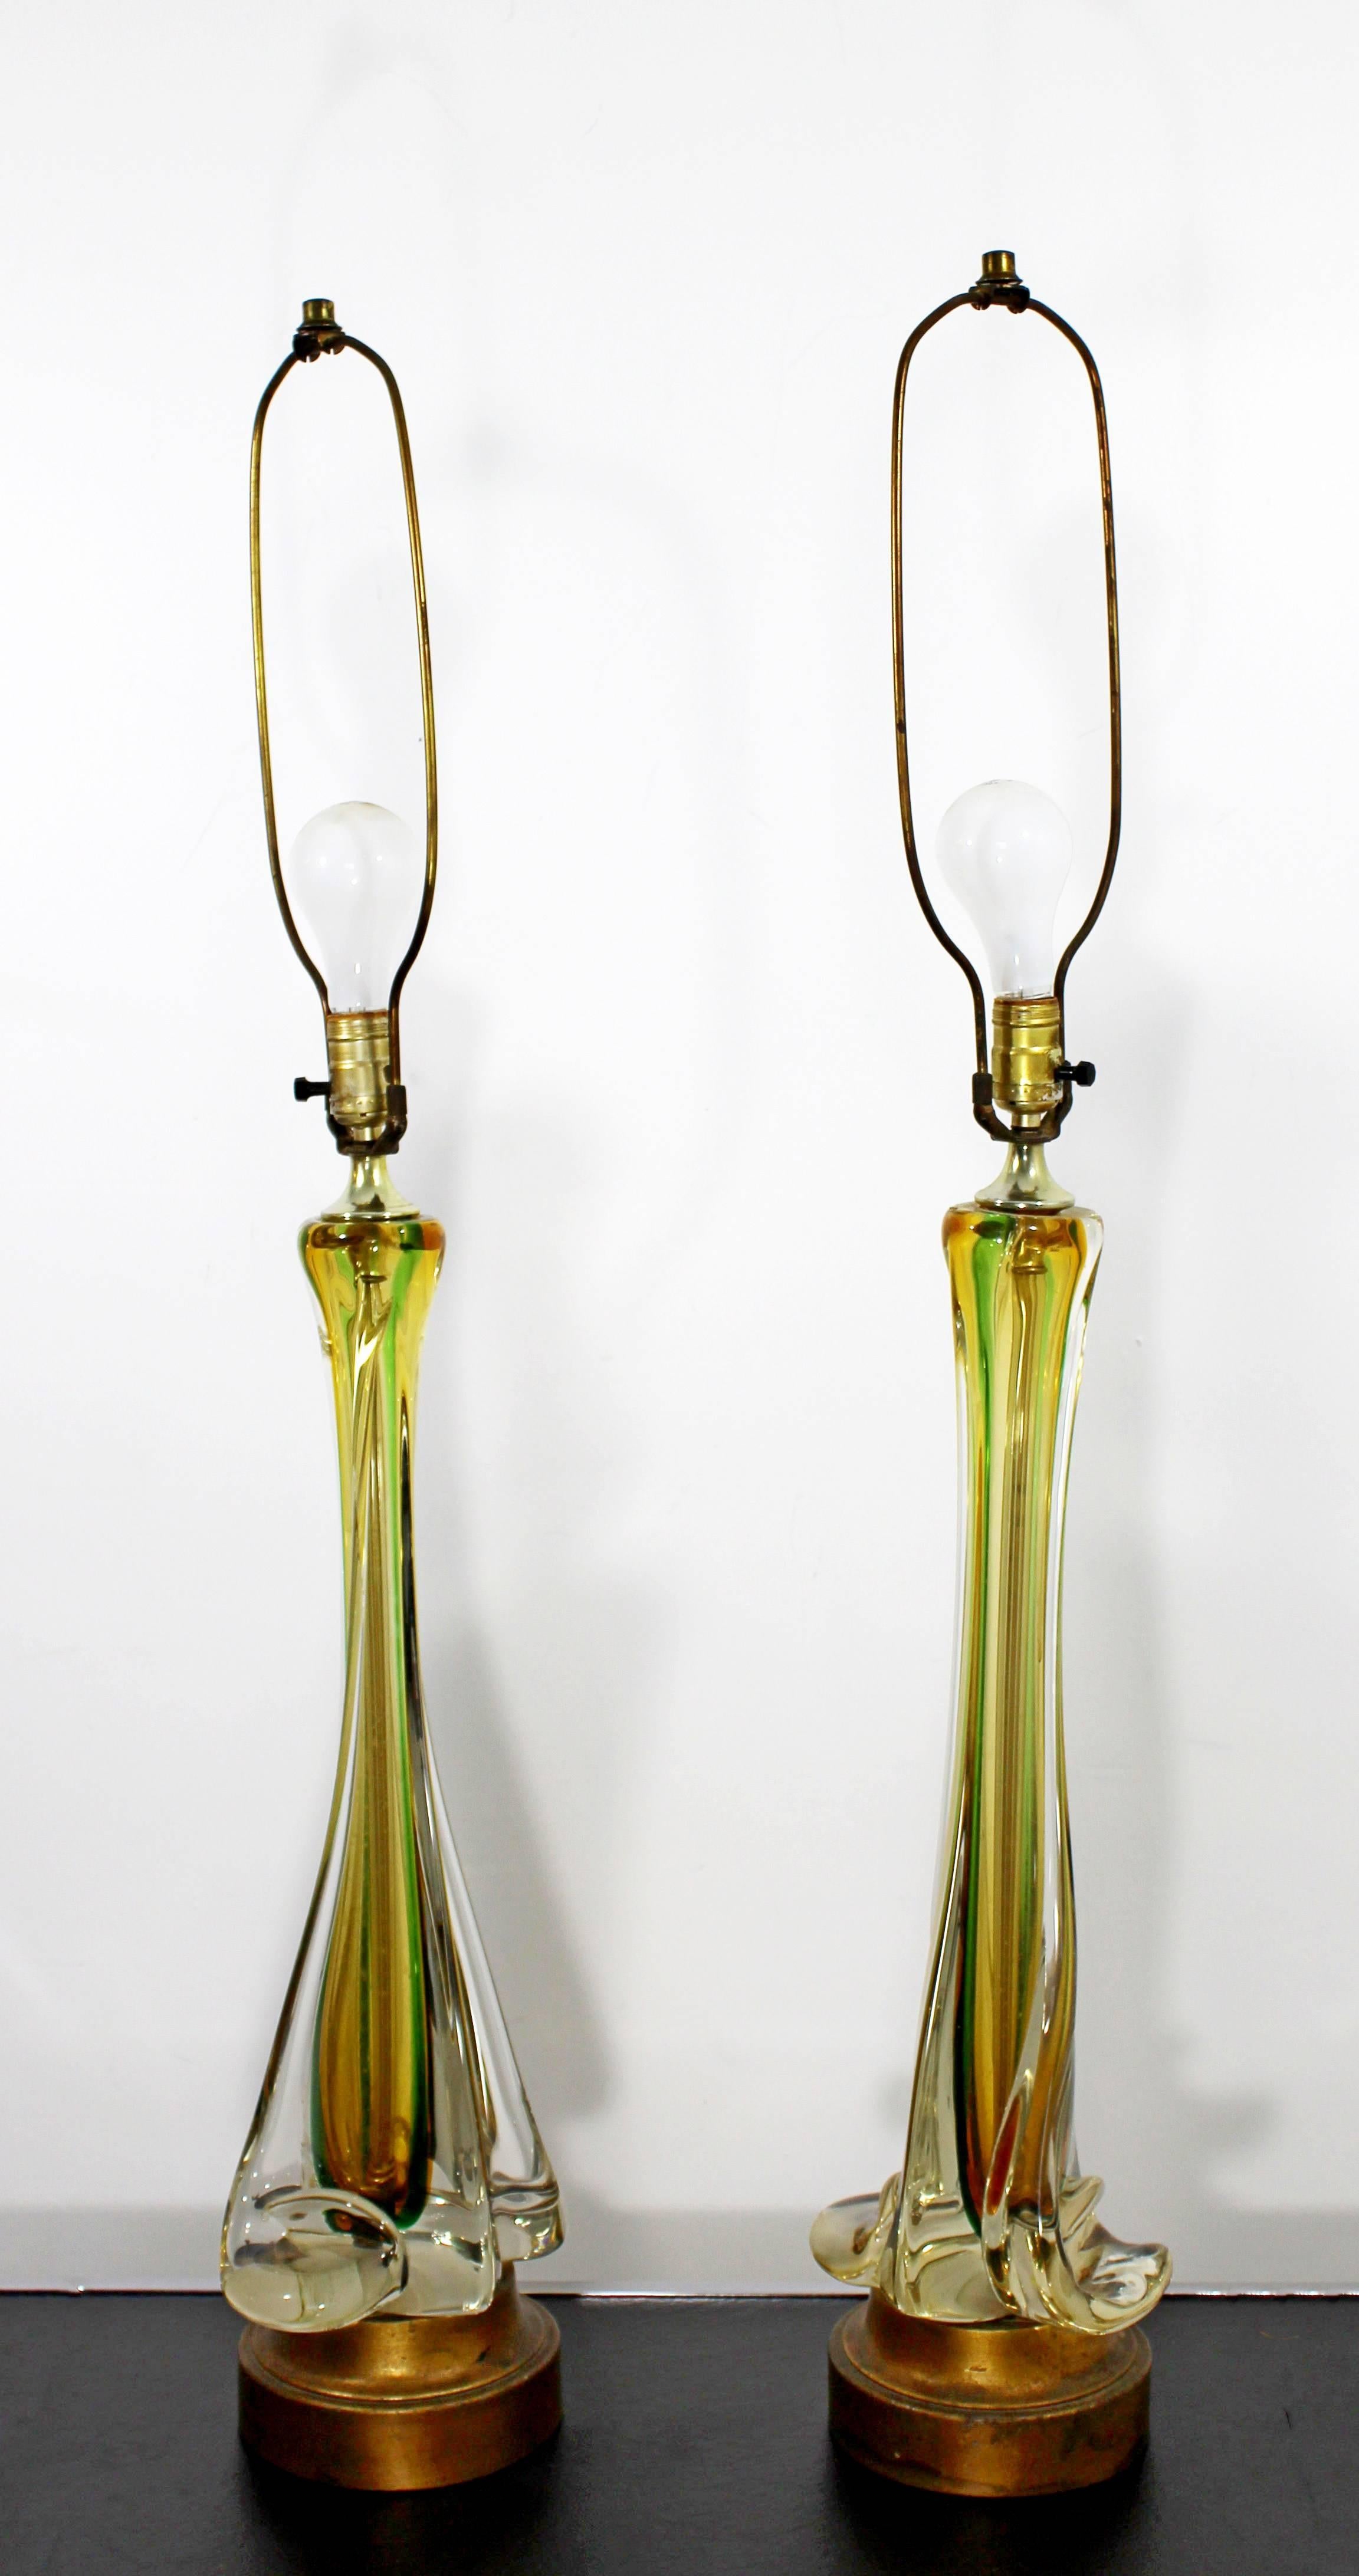 For your consideration is a stunning pair of Murano Seguso glass table lamps from Italy. In excellent condition. The dimensions are 7